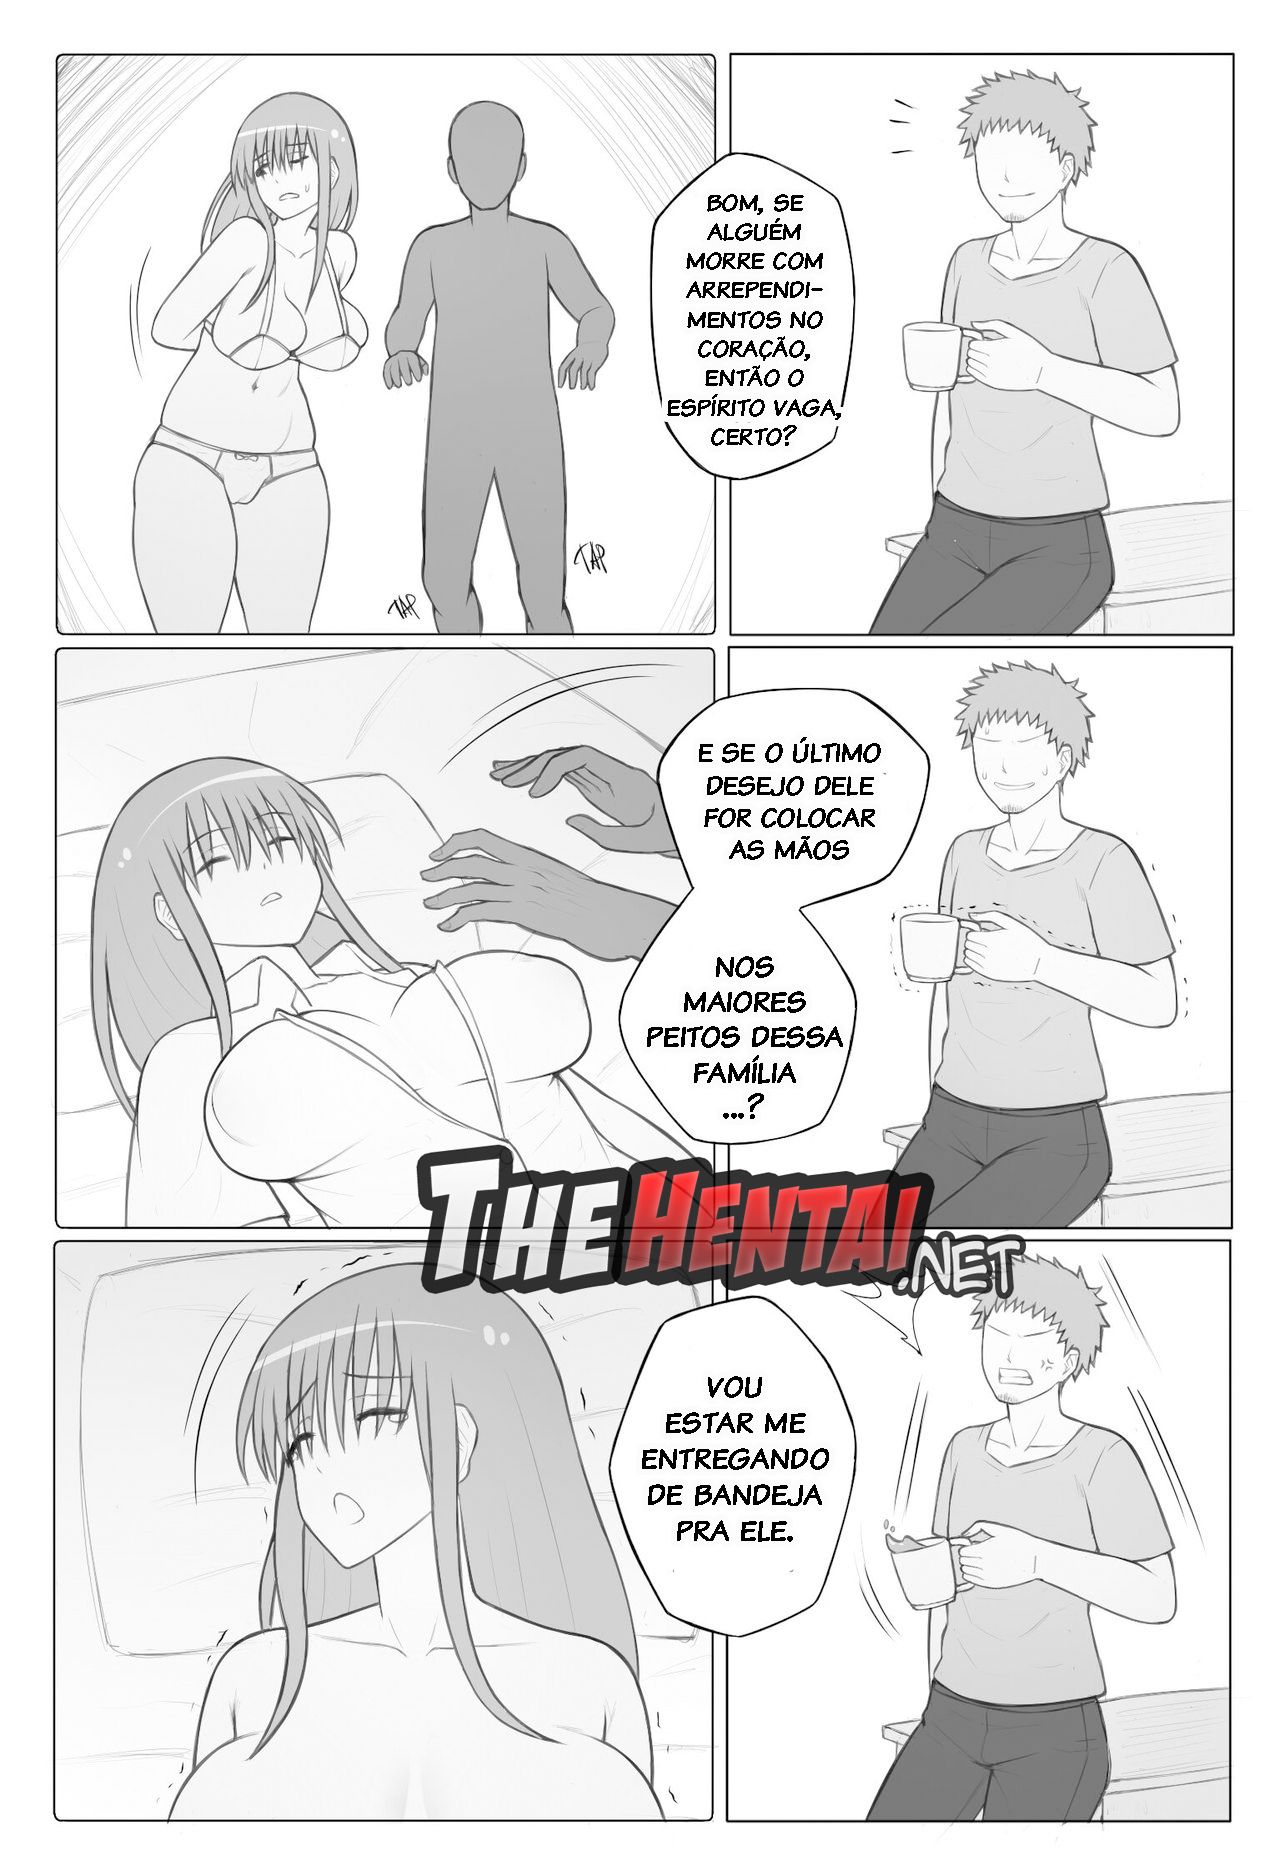 A Monday Night Haunting Hentai pt-br 14